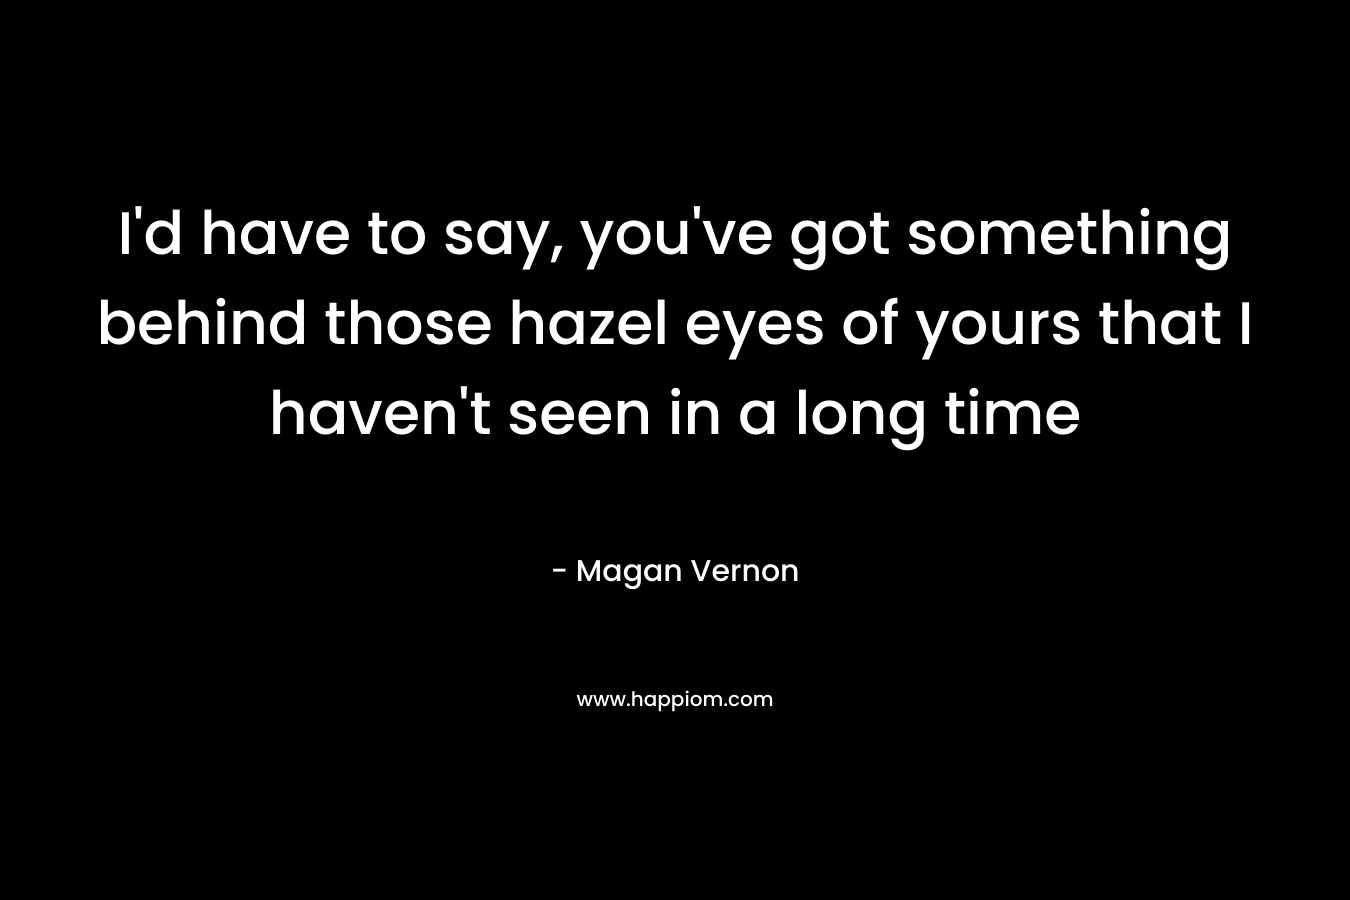 I’d have to say, you’ve got something behind those hazel eyes of yours that I haven’t seen in a long time – Magan Vernon